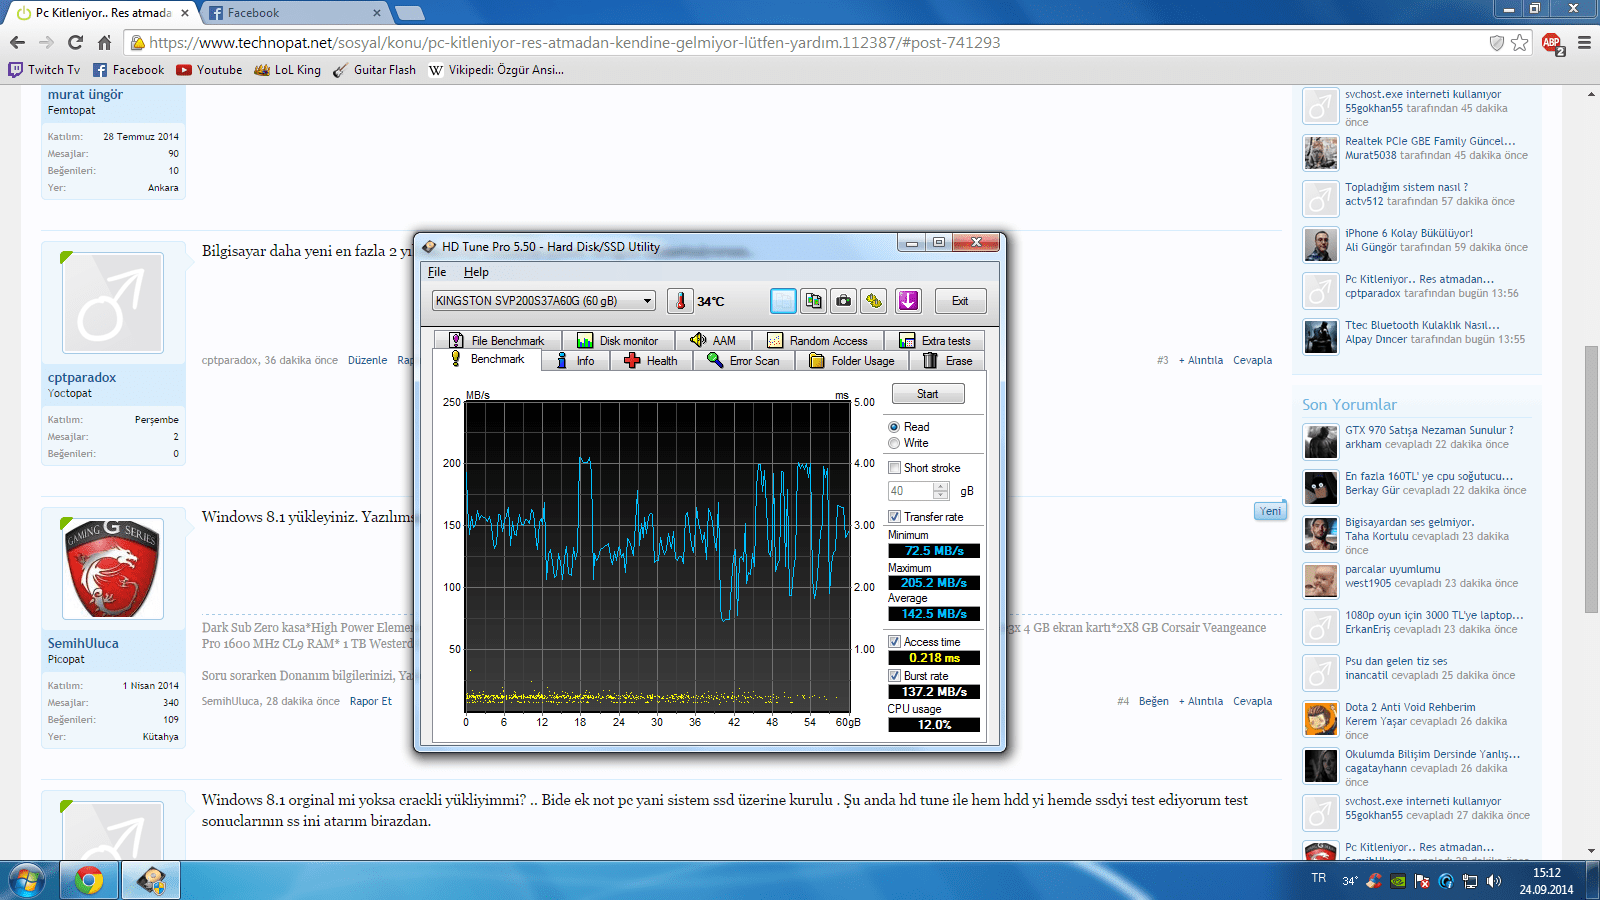 hd tune ssd test.png